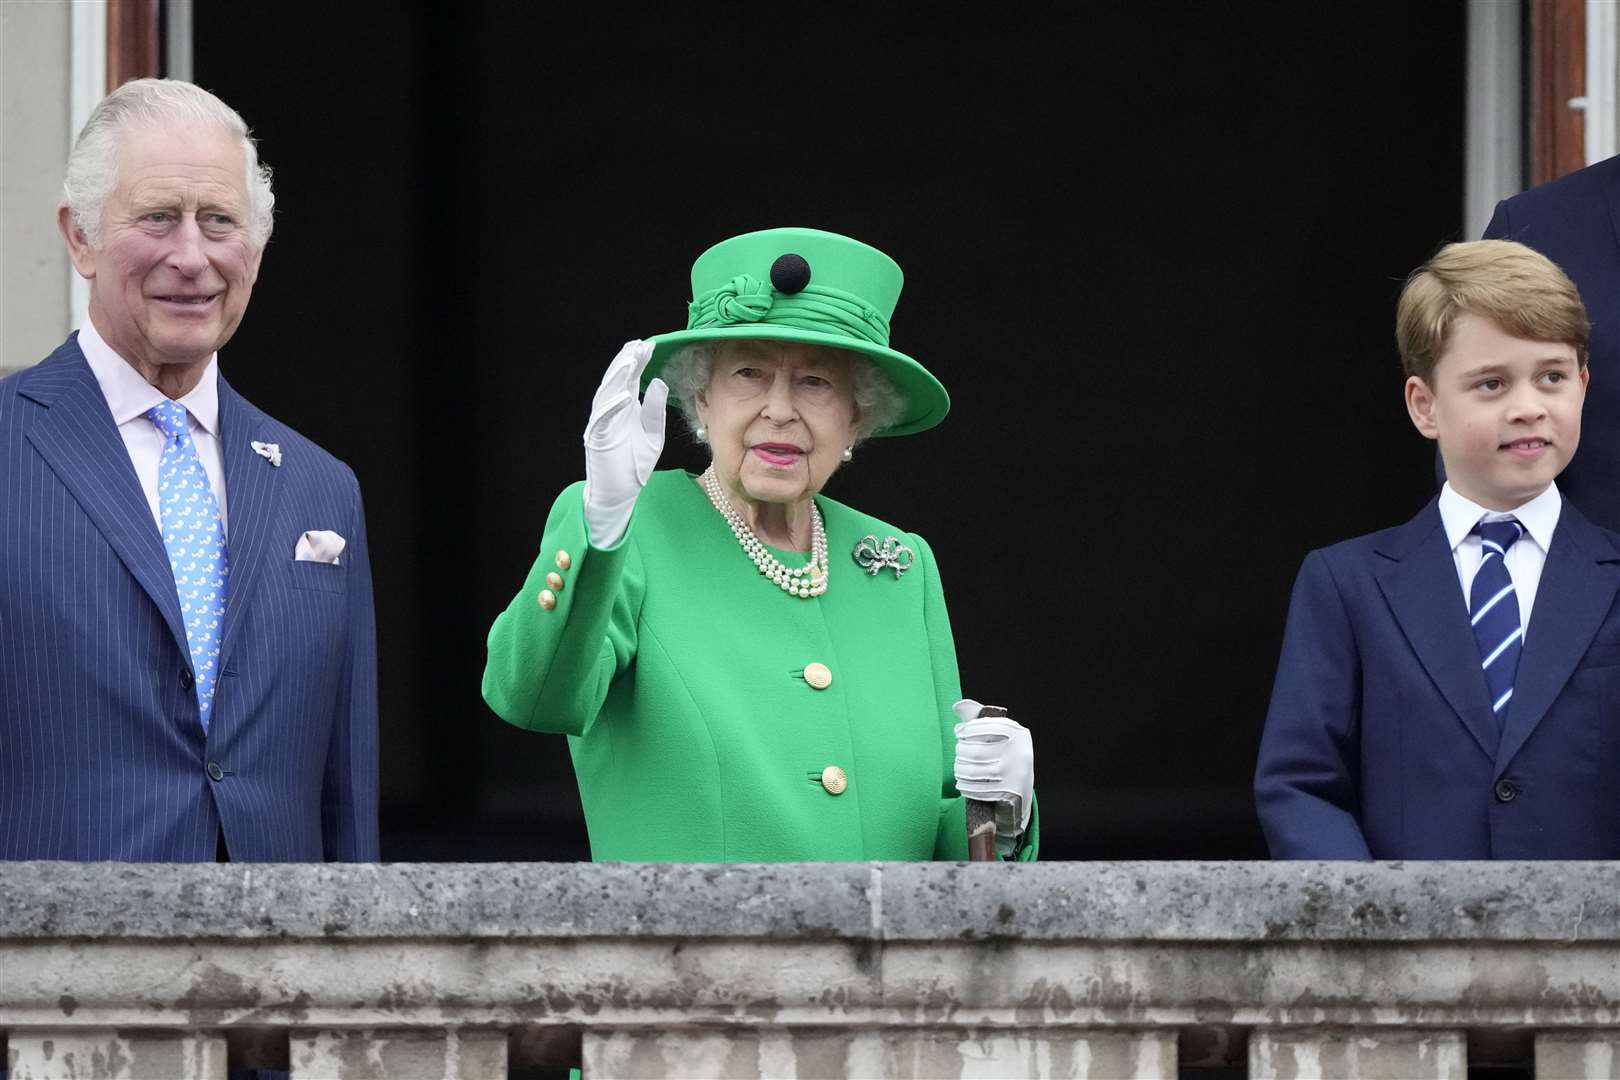 The Queen during the Platinum Jubilee celebrations in June (Frank Augustein/PA)